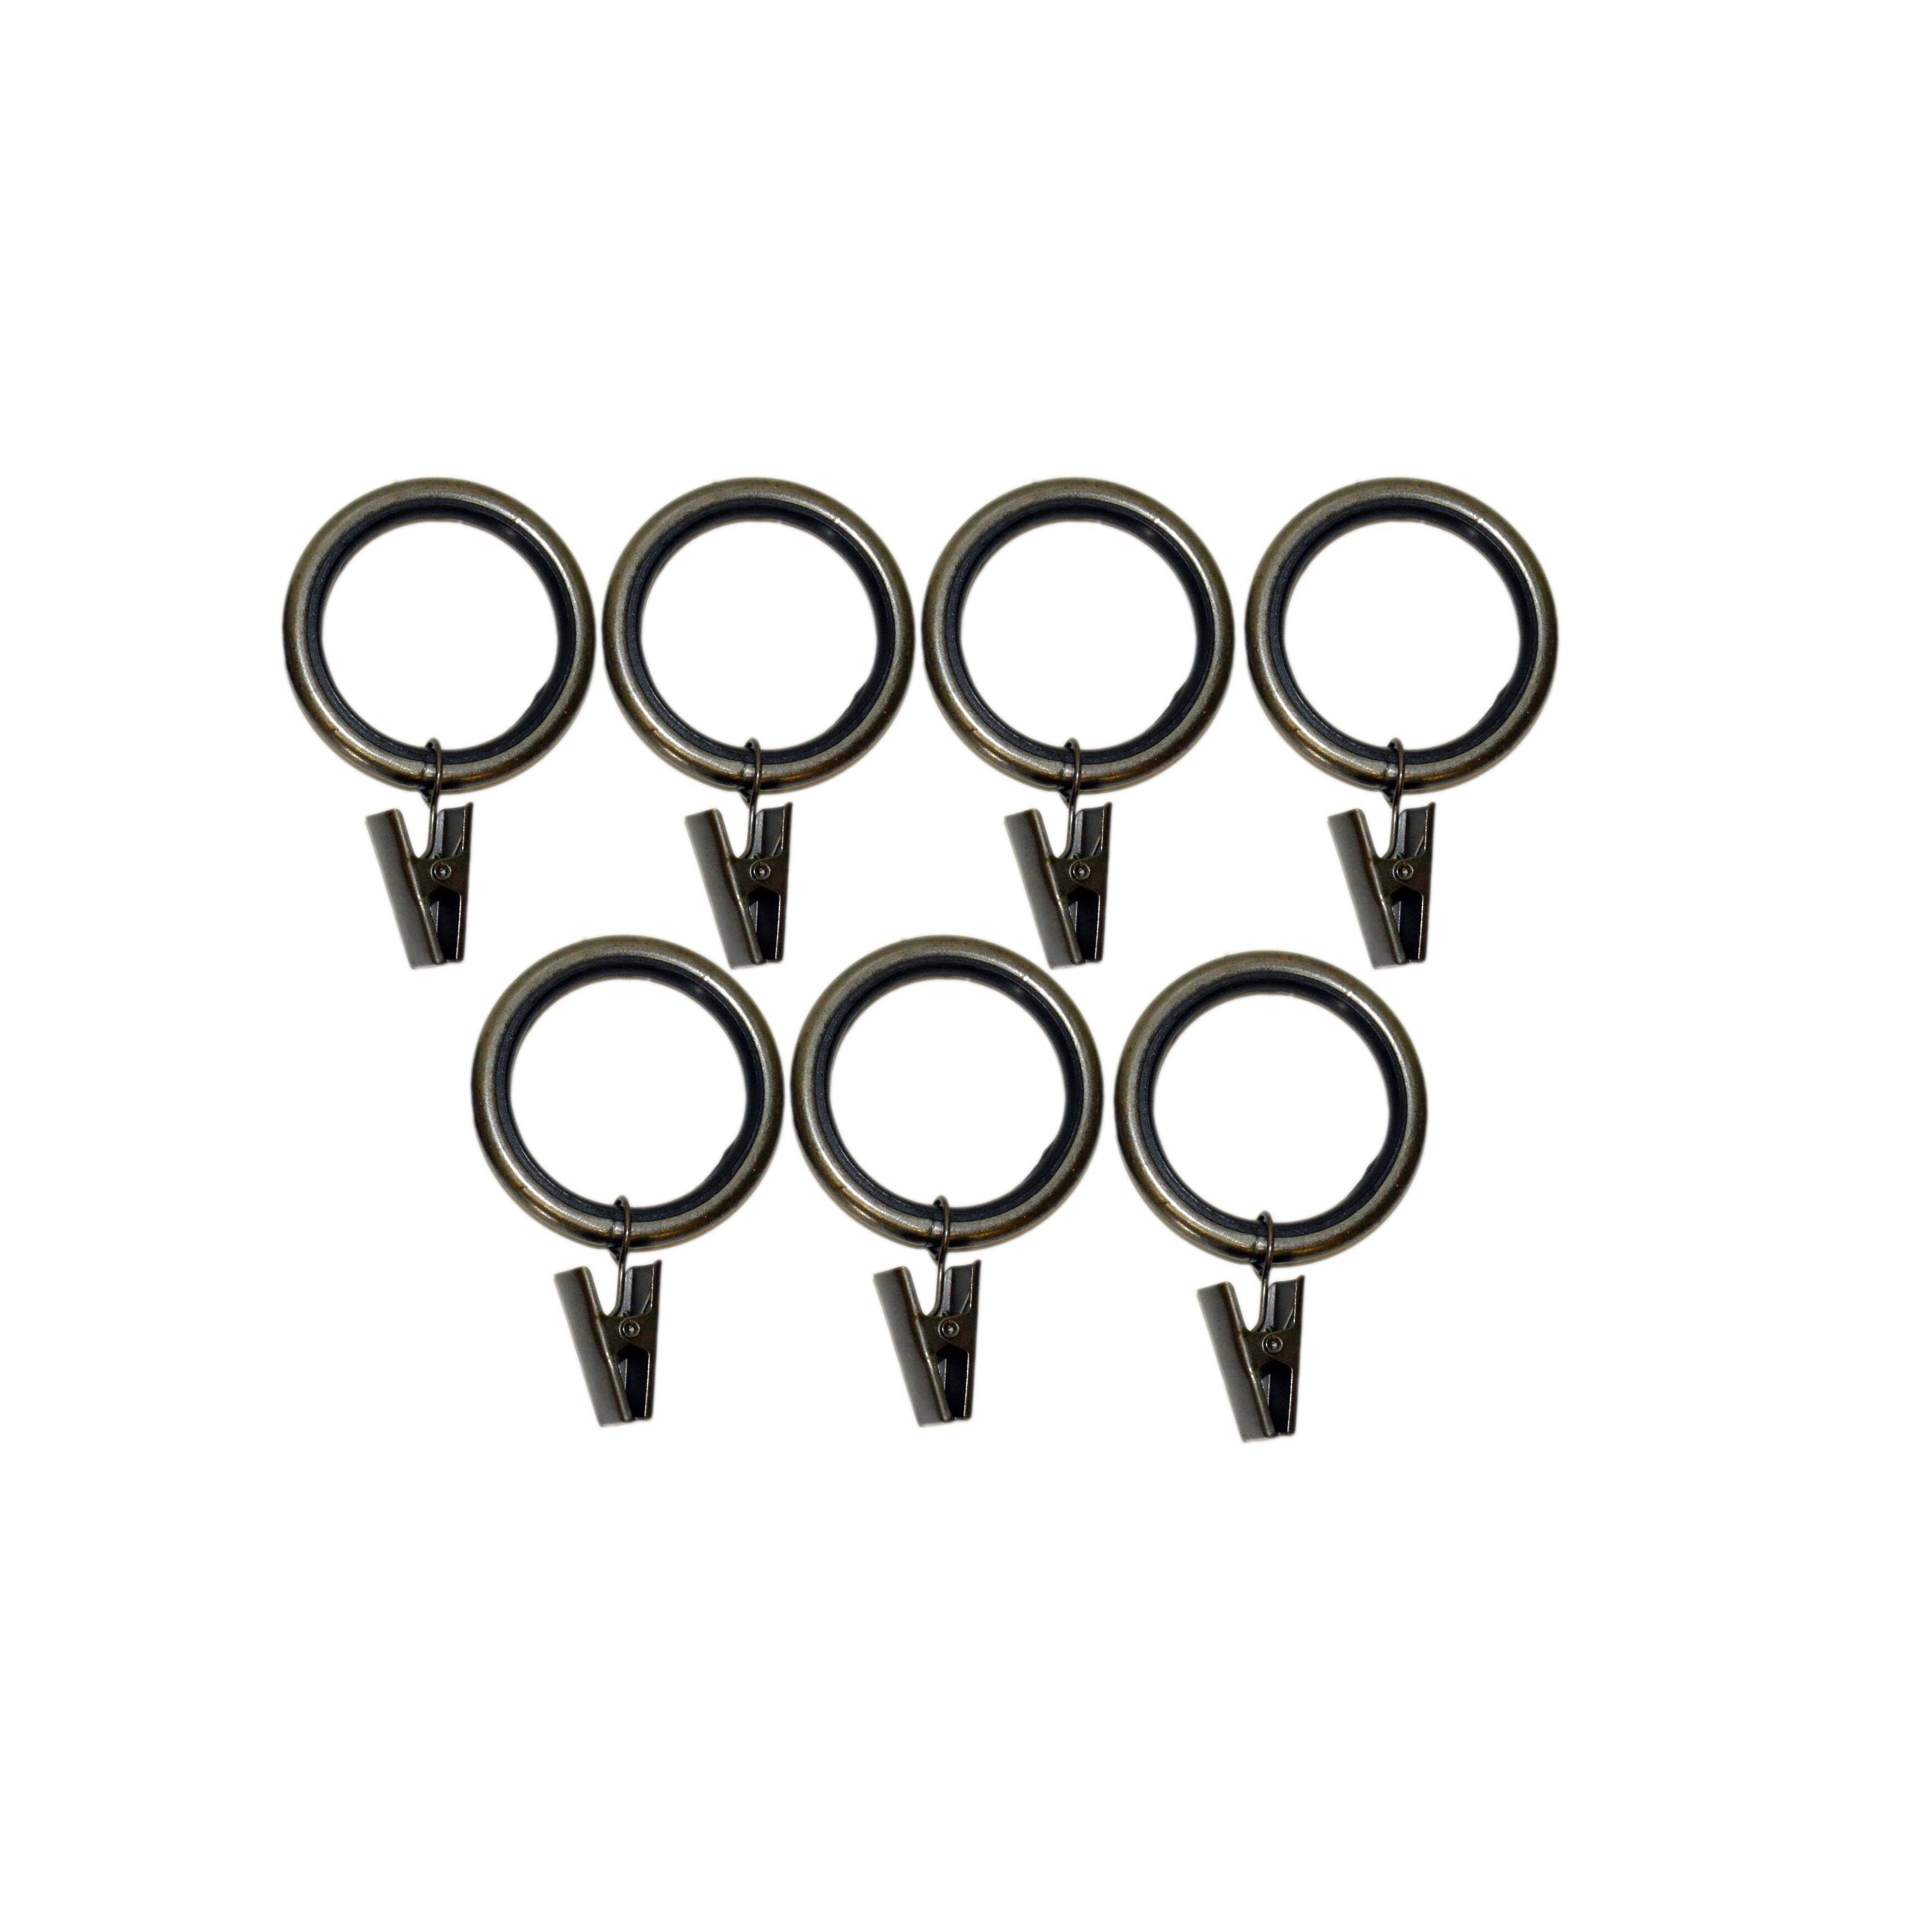 Versailles Home Fashions Curtain Clip Rings, Set of 7 - Antique Brass